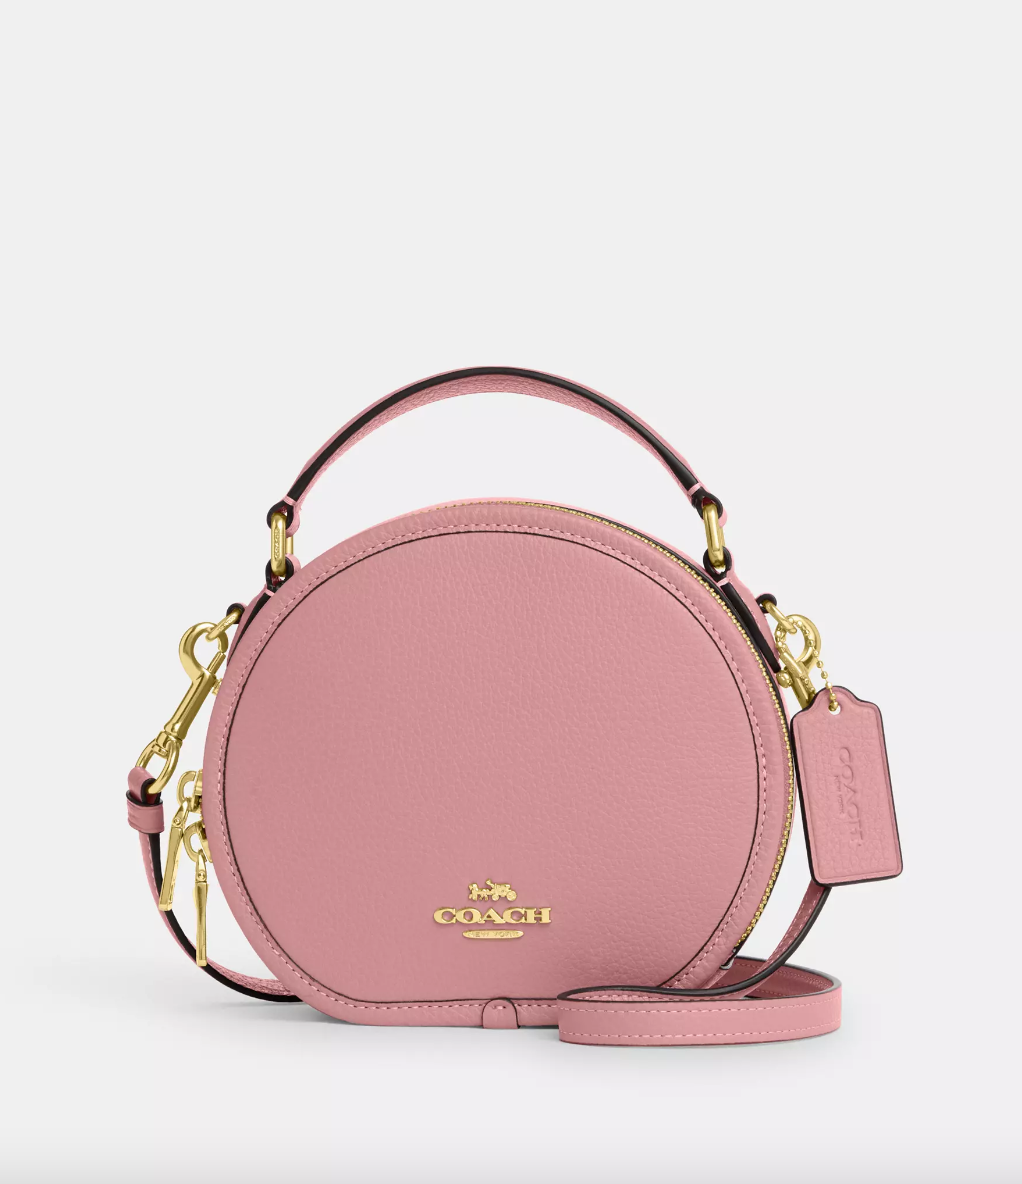 Why I love the Coach Hutton Bag (Review) - Fashion For Lunch